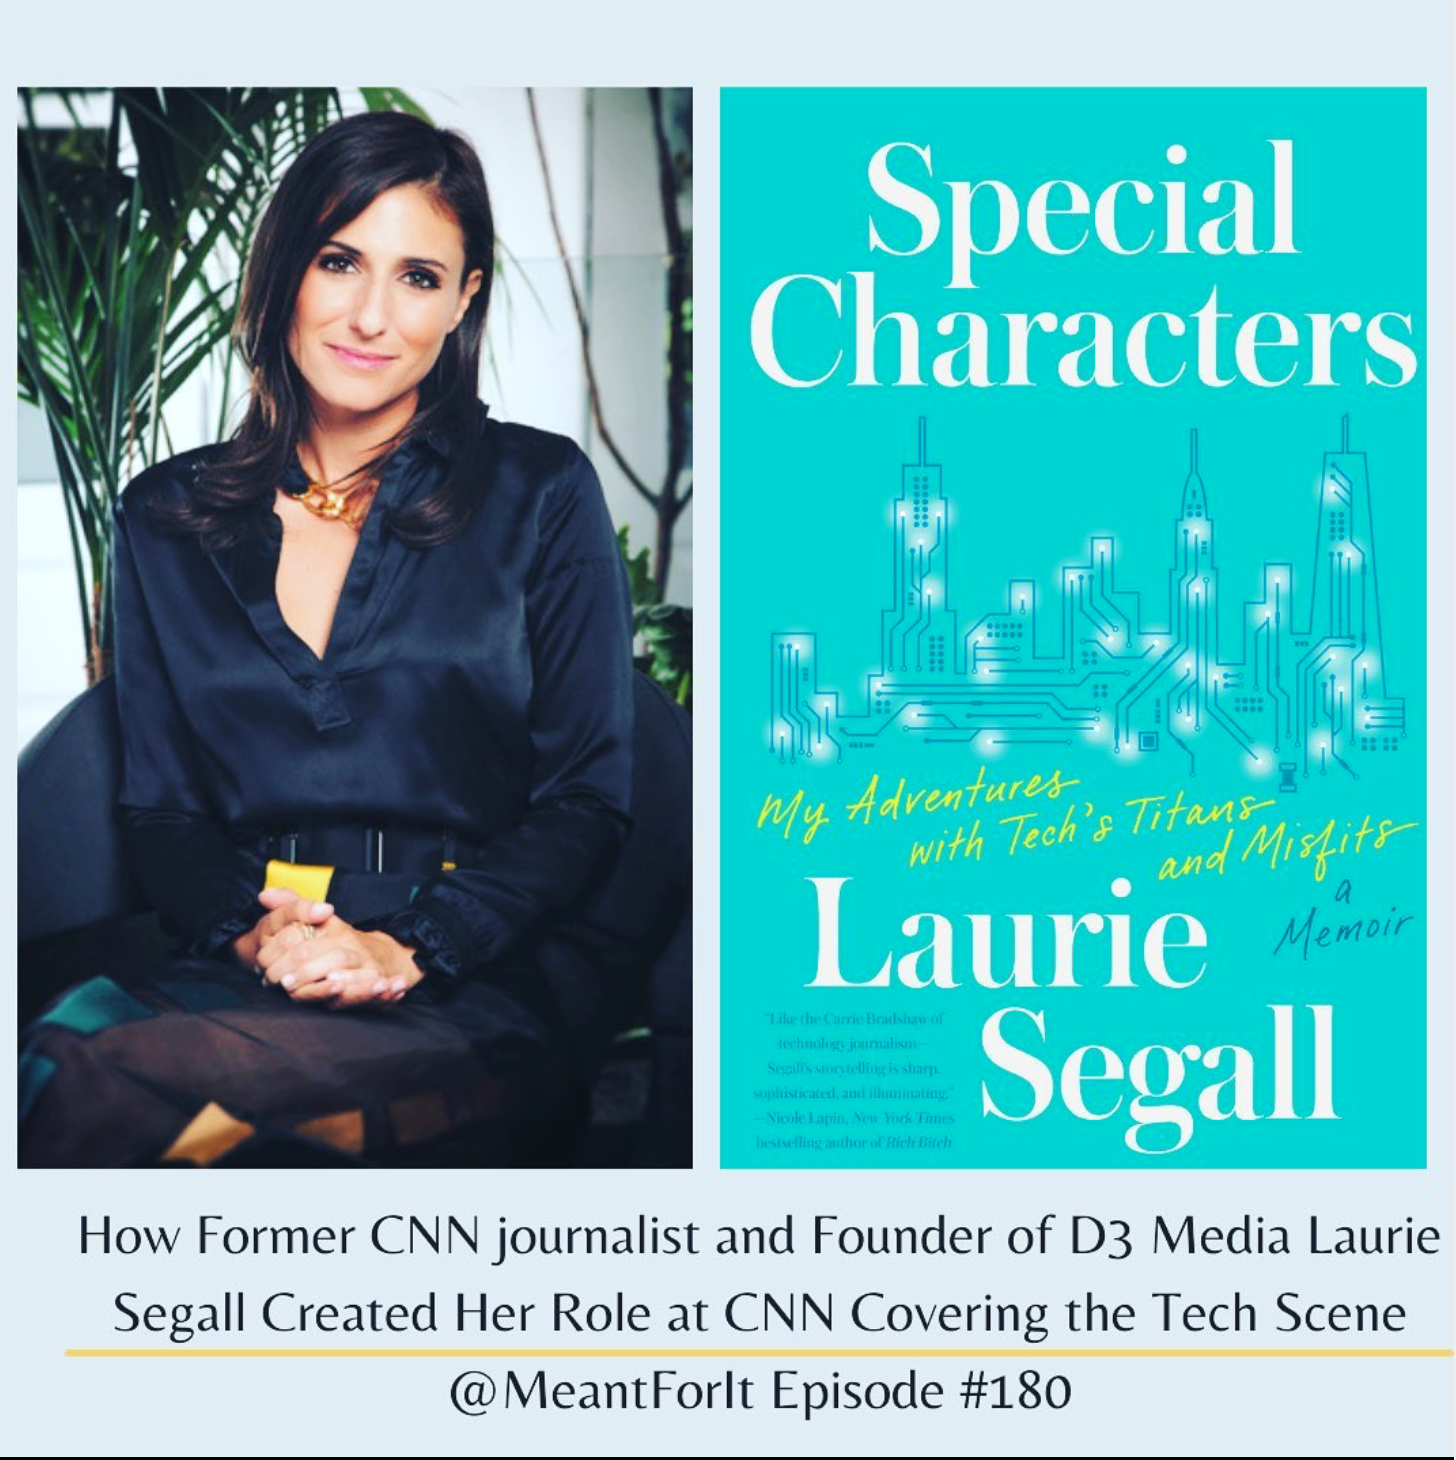 How Former CNN journalist and Founder of D3 Media Laurie Segall Created Her Role at CNN Covering the Tech Scene